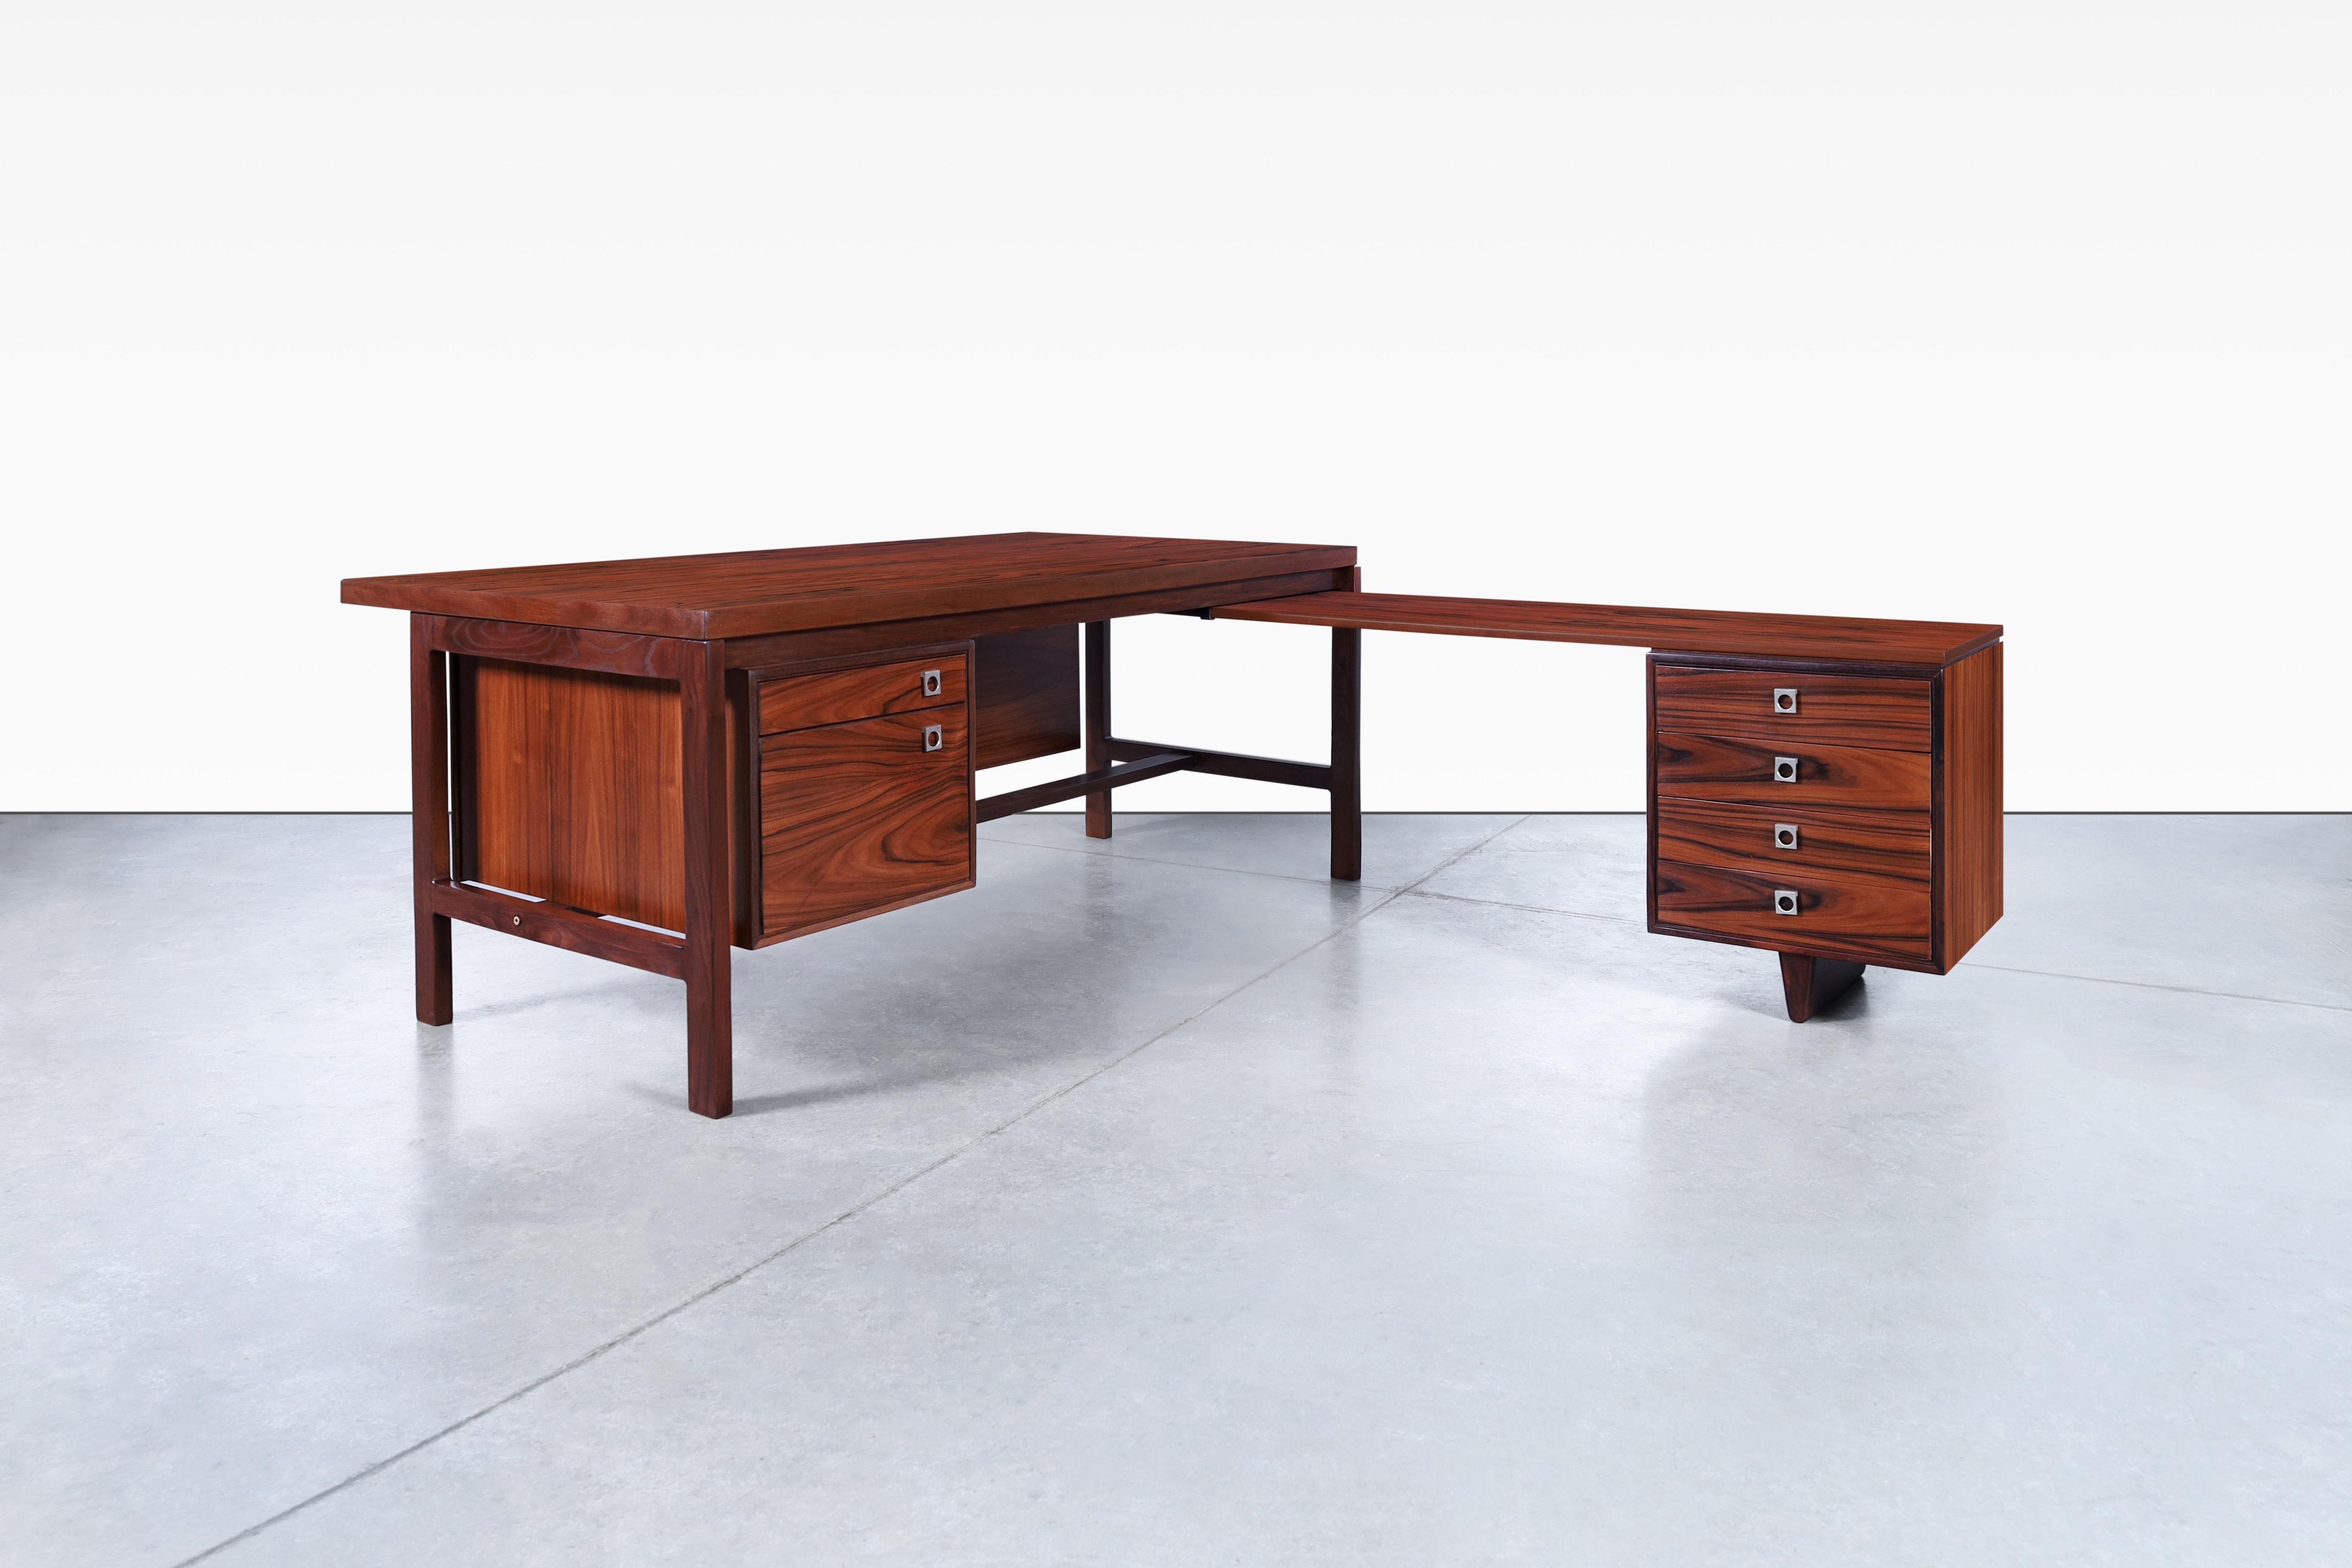 Looking for a statement piece to complete your home office or workspace? Look no further than this stunning Danish modern rosewood L-shaped desk designed by Arne Vodder for H.P. Hansen in Denmark in the 1960s. The unique L-shape design is both